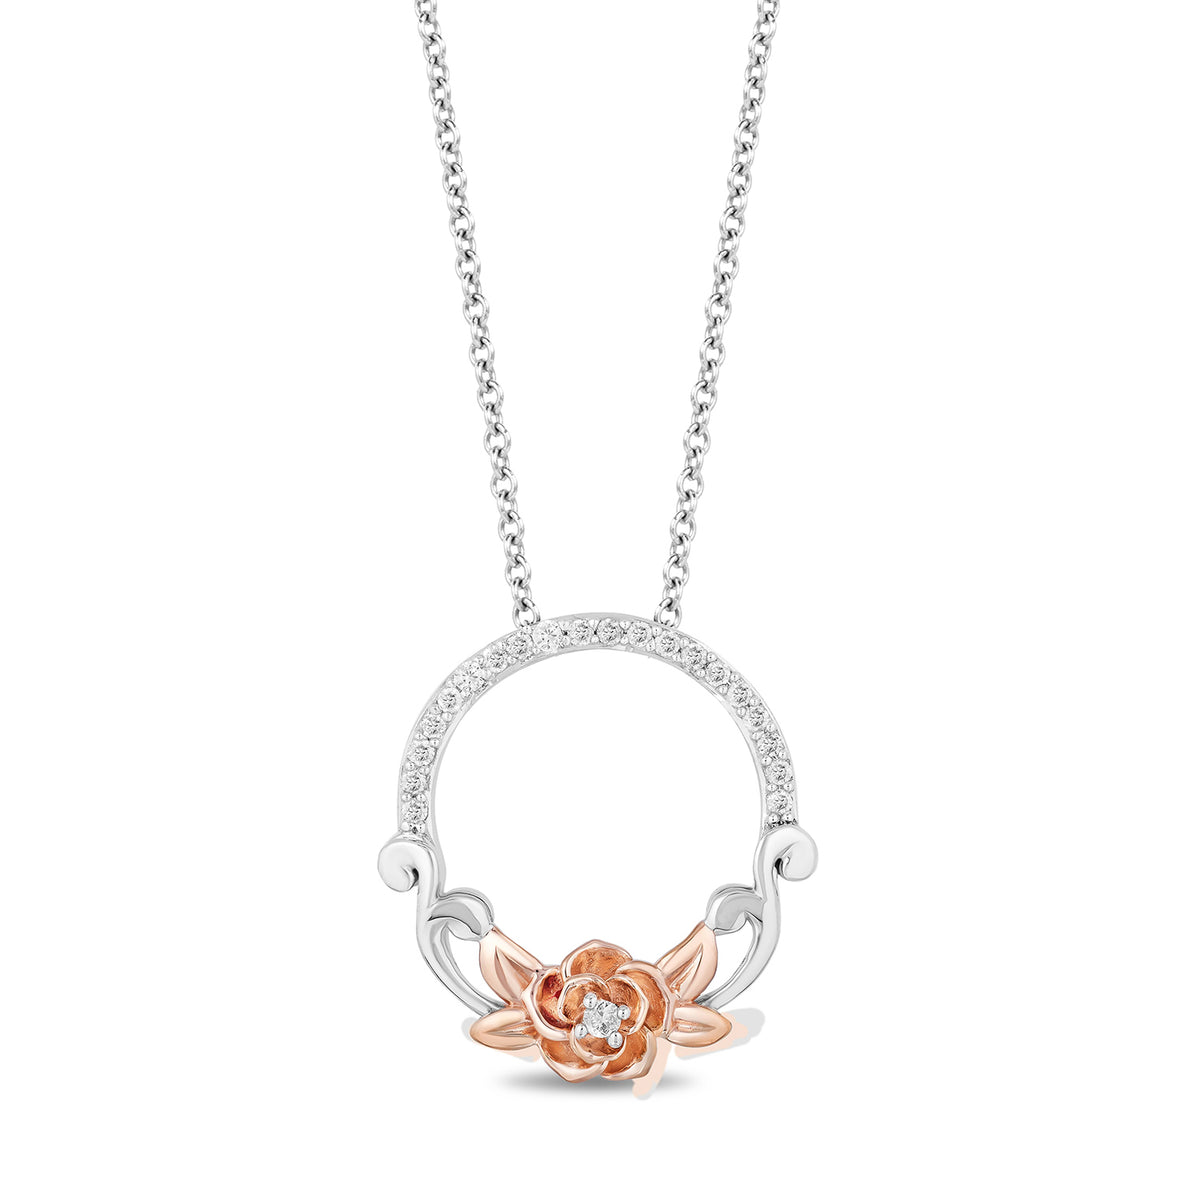 Disney Aurora Inspired Diamond Pendant Necklace Rose Gold Over Sterling Silver 1/5 Cttw | Enchanted Disney Fine Jewelry